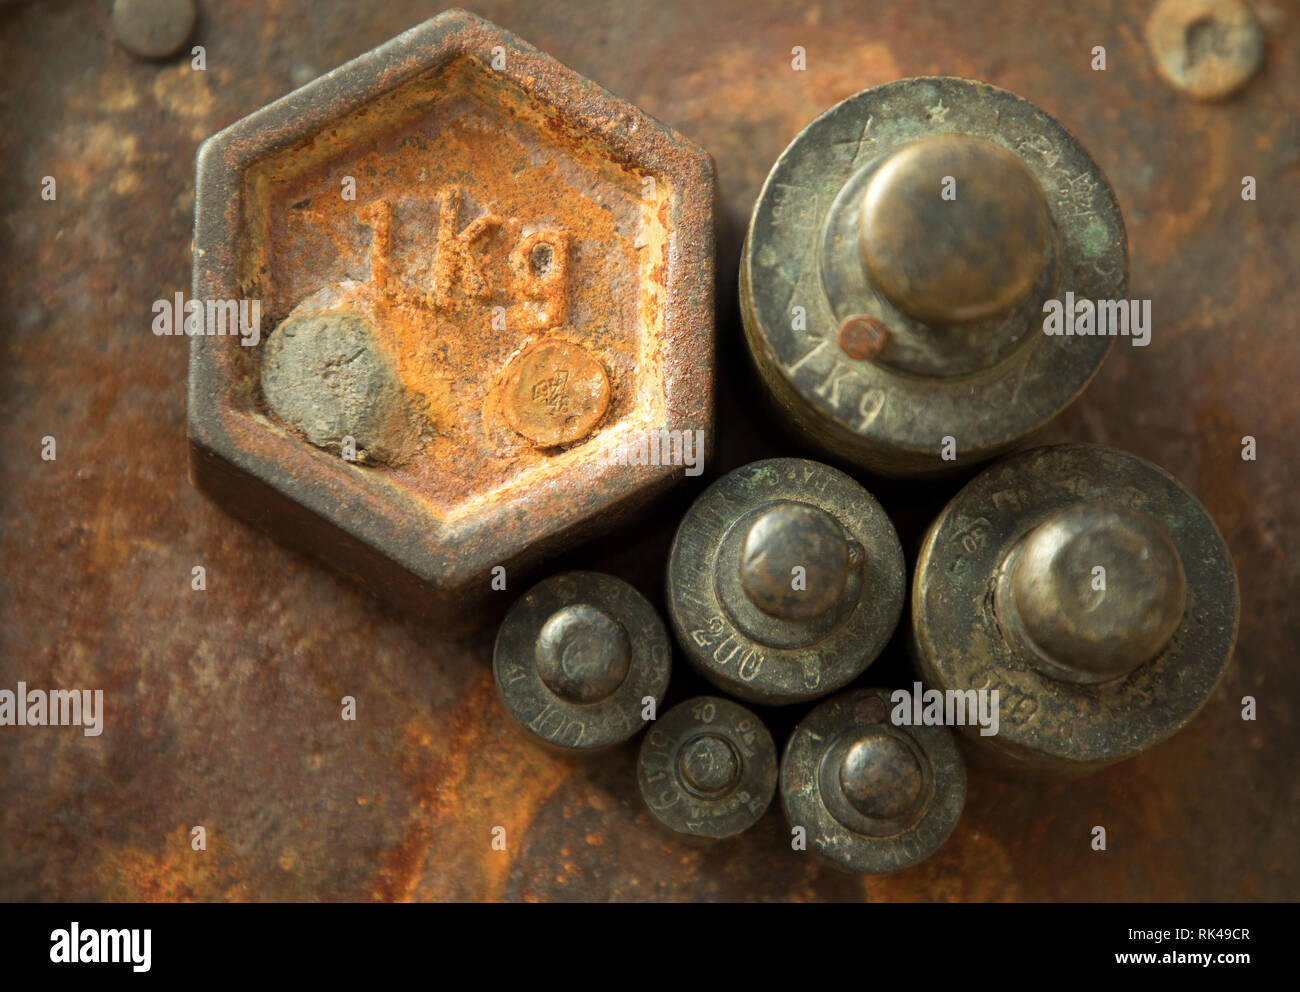 Weights for retro scales. Vintage weight for a balance scale, Balance weights. Stock Photo